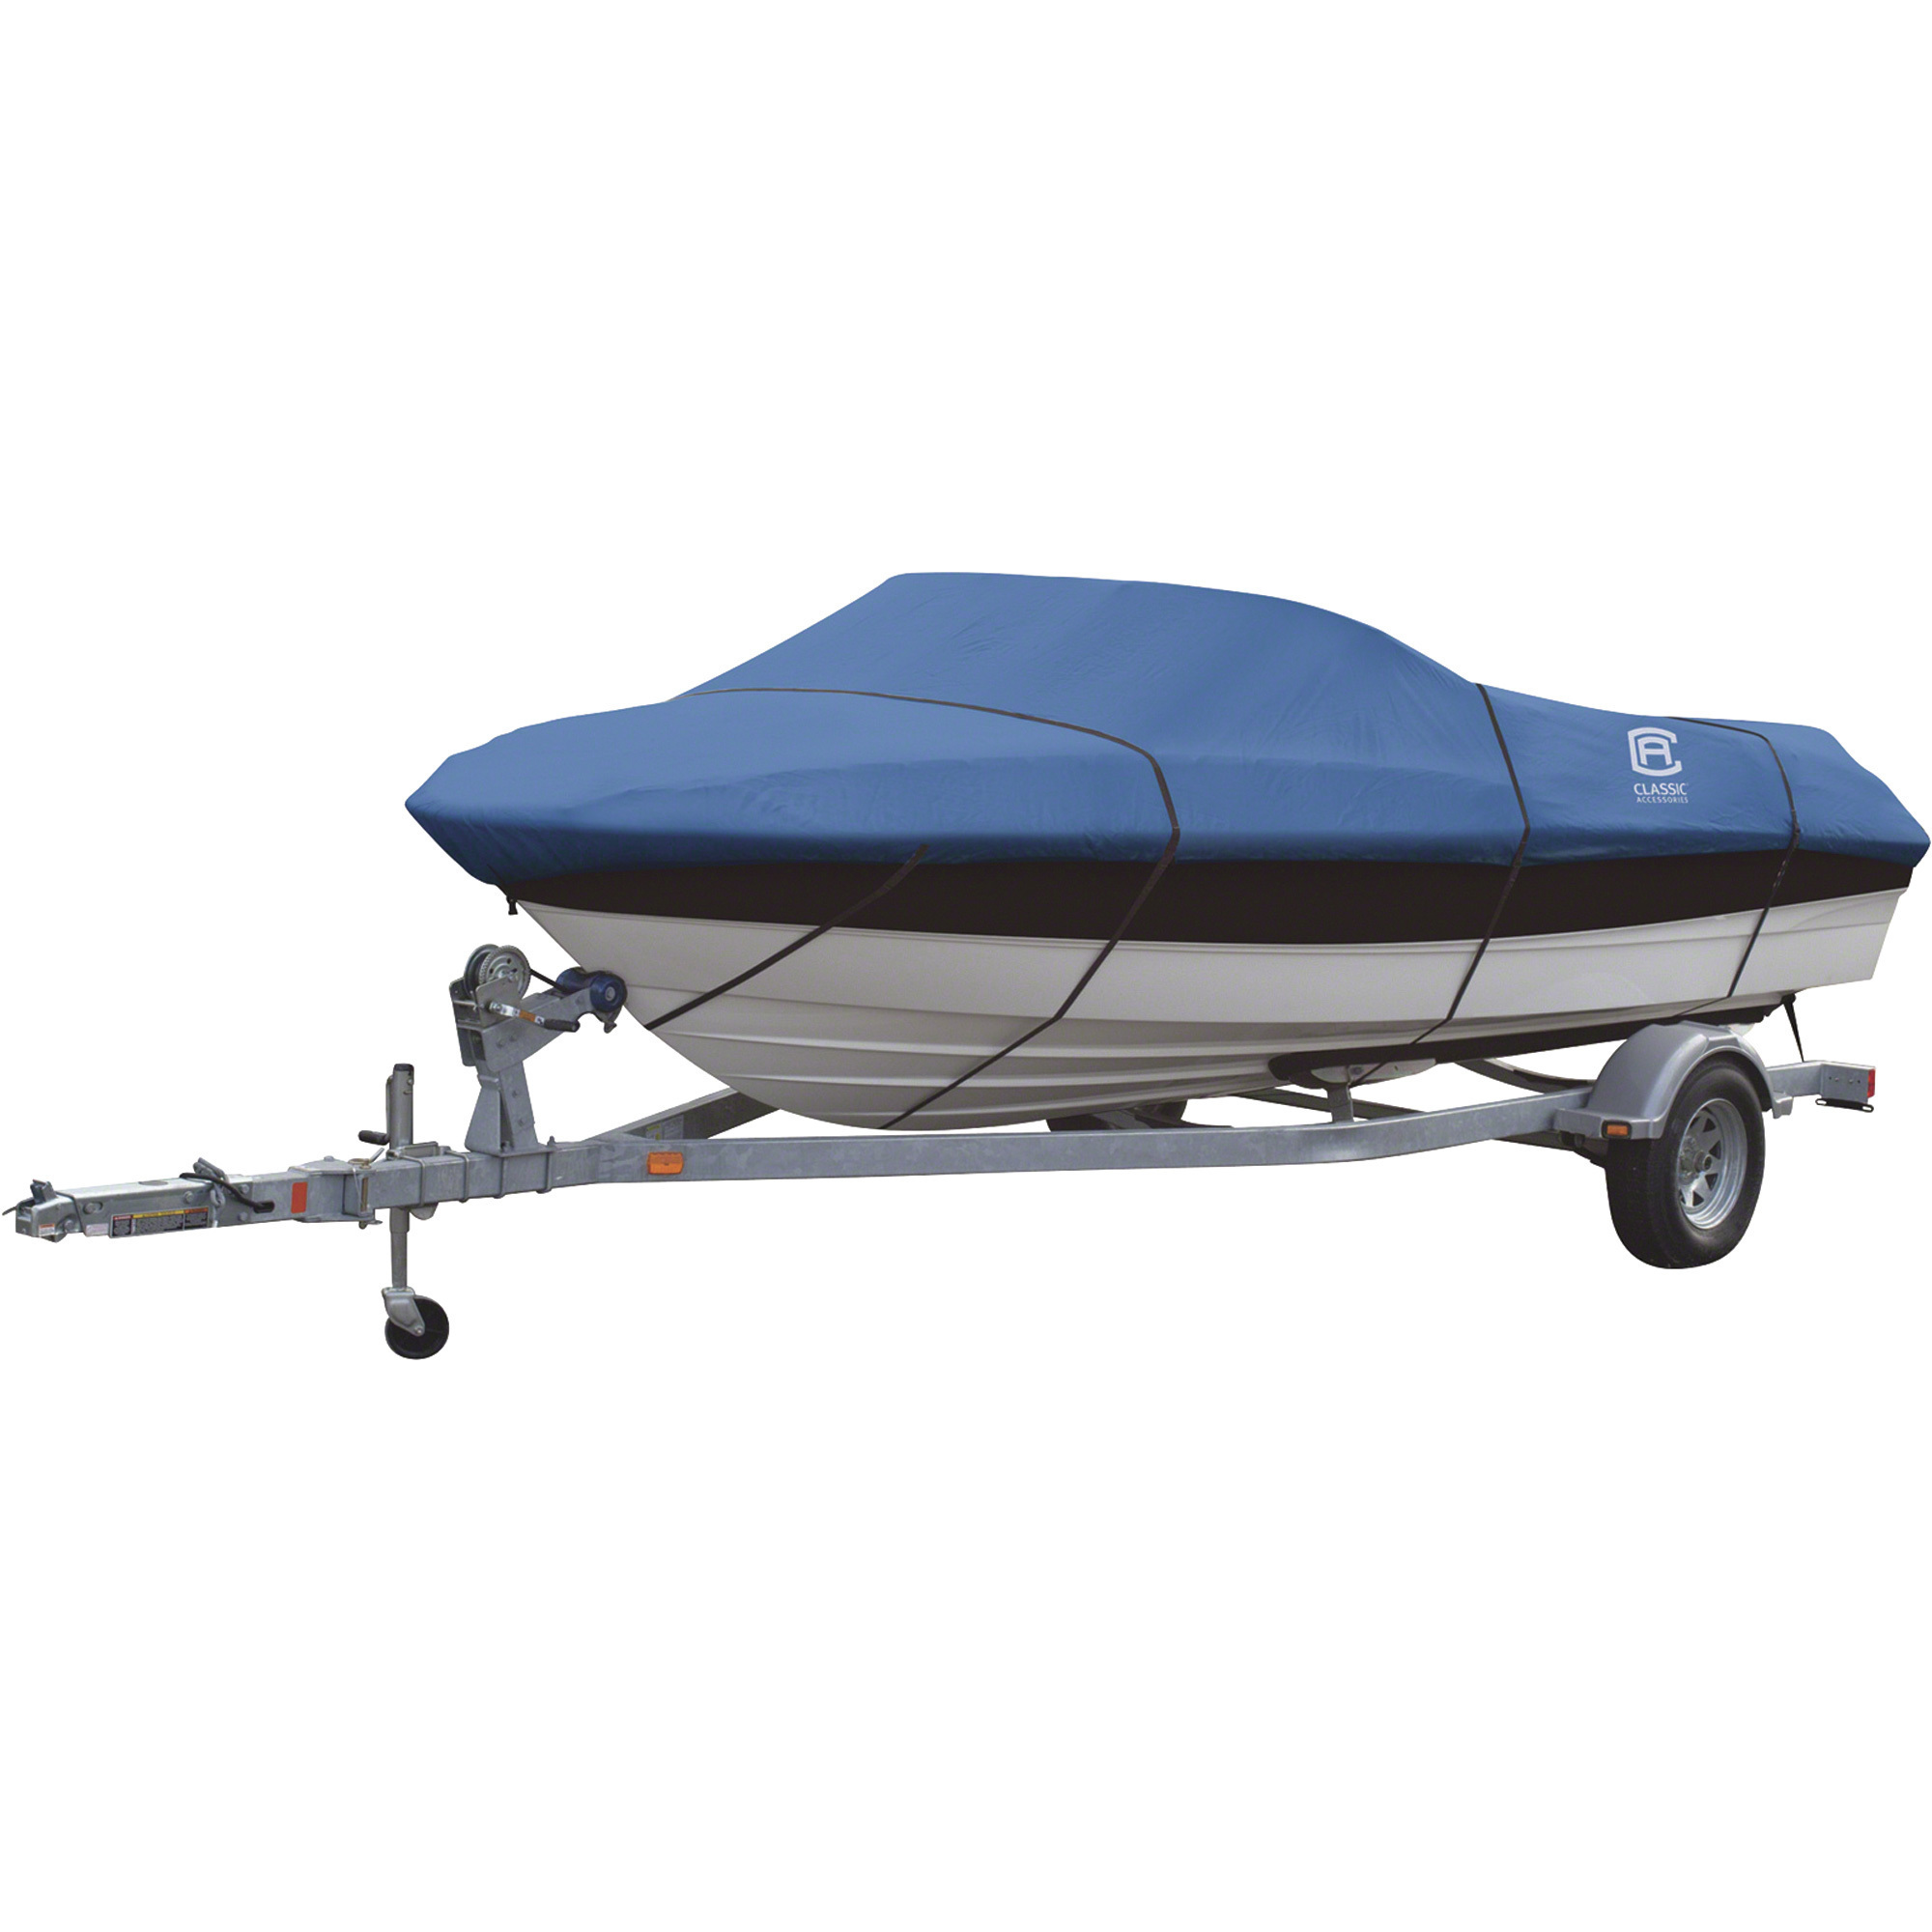 Classic Accessories Stellex All Seasons Boat Cover, Blue, Fits 20ft.-22ft. x 106Inch W, Model 20-149-120501-00